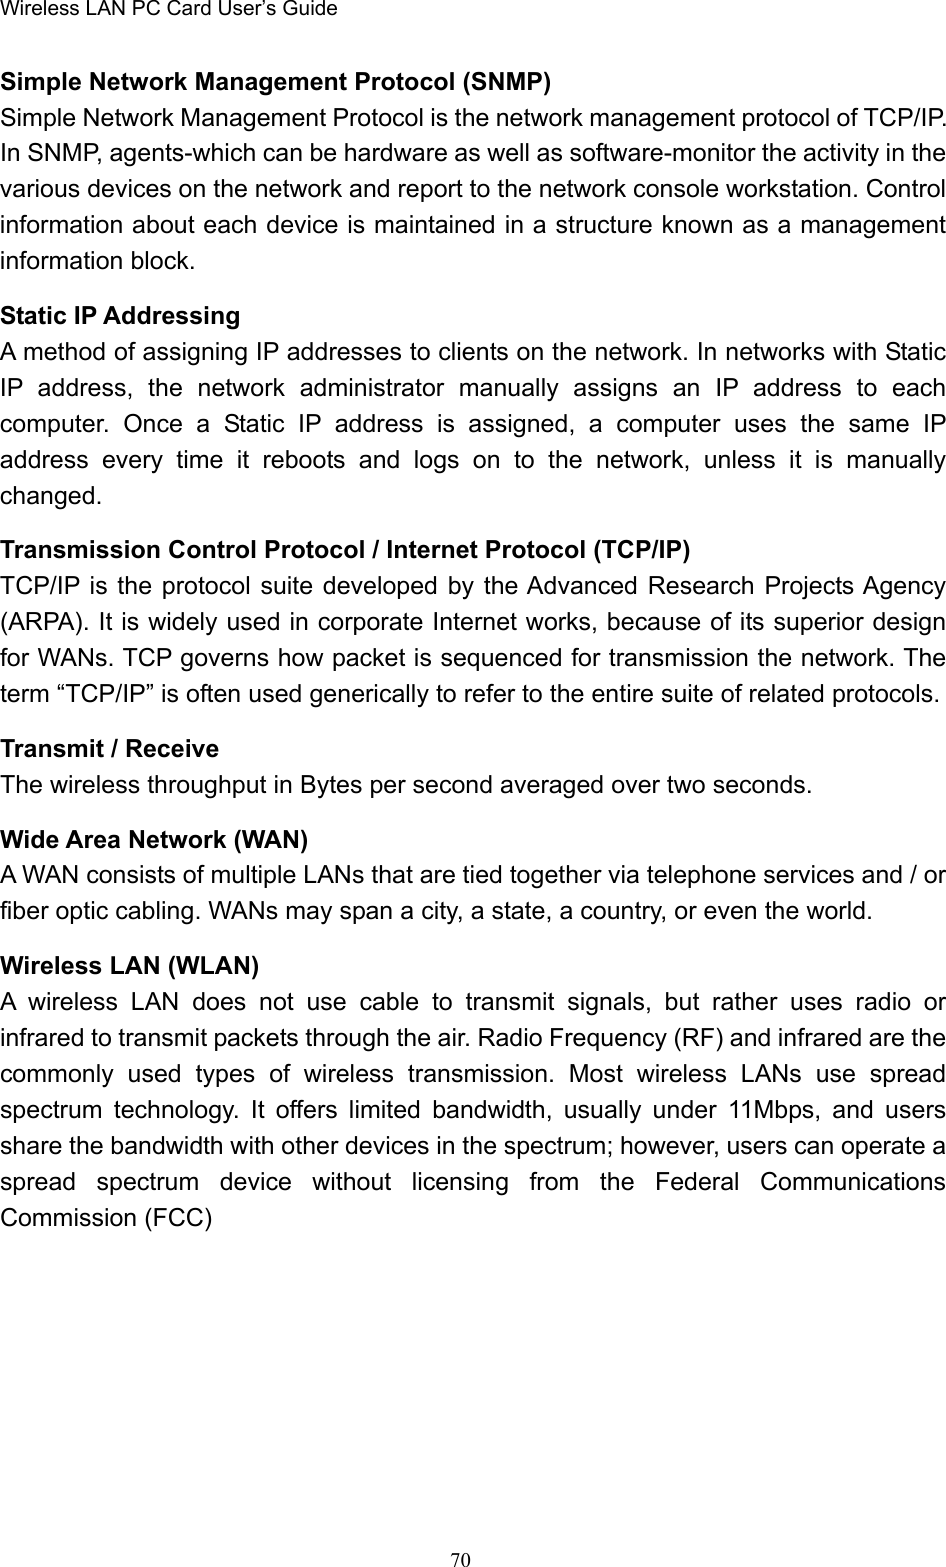 Wireless LAN PC Card User’s Guide70Simple Network Management Protocol (SNMP)Simple Network Management Protocol is the network management protocol of TCP/IP.In SNMP, agents-which can be hardware as well as software-monitor the activity in thevarious devices on the network and report to the network console workstation. Controlinformation about each device is maintained in a structure known as a managementinformation block.Static IP AddressingA method of assigning IP addresses to clients on the network. In networks with StaticIP address, the network administrator manually assigns an IP address to eachcomputer. Once a Static IP address is assigned, a computer uses the same IPaddress every time it reboots and logs on to the network, unless it is manuallychanged.Transmission Control Protocol / Internet Protocol (TCP/IP)TCP/IP is the protocol suite developed by the Advanced Research Projects Agency(ARPA). It is widely used in corporate Internet works, because of its superior designfor WANs. TCP governs how packet is sequenced for transmission the network. Theterm “TCP/IP” is often used generically to refer to the entire suite of related protocols.Transmit / ReceiveThe wireless throughput in Bytes per second averaged over two seconds.Wide Area Network (WAN)A WAN consists of multiple LANs that are tied together via telephone services and / orfiber optic cabling. WANs may span a city, a state, a country, or even the world.Wireless LAN (WLAN)A wireless LAN does not use cable to transmit signals, but rather uses radio orinfrared to transmit packets through the air. Radio Frequency (RF) and infrared are thecommonly used types of wireless transmission. Most wireless LANs use spreadspectrum technology. It offers limited bandwidth, usually under 11Mbps, and usersshare the bandwidth with other devices in the spectrum; however, users can operate aspread spectrum device without licensing from the Federal CommunicationsCommission (FCC)